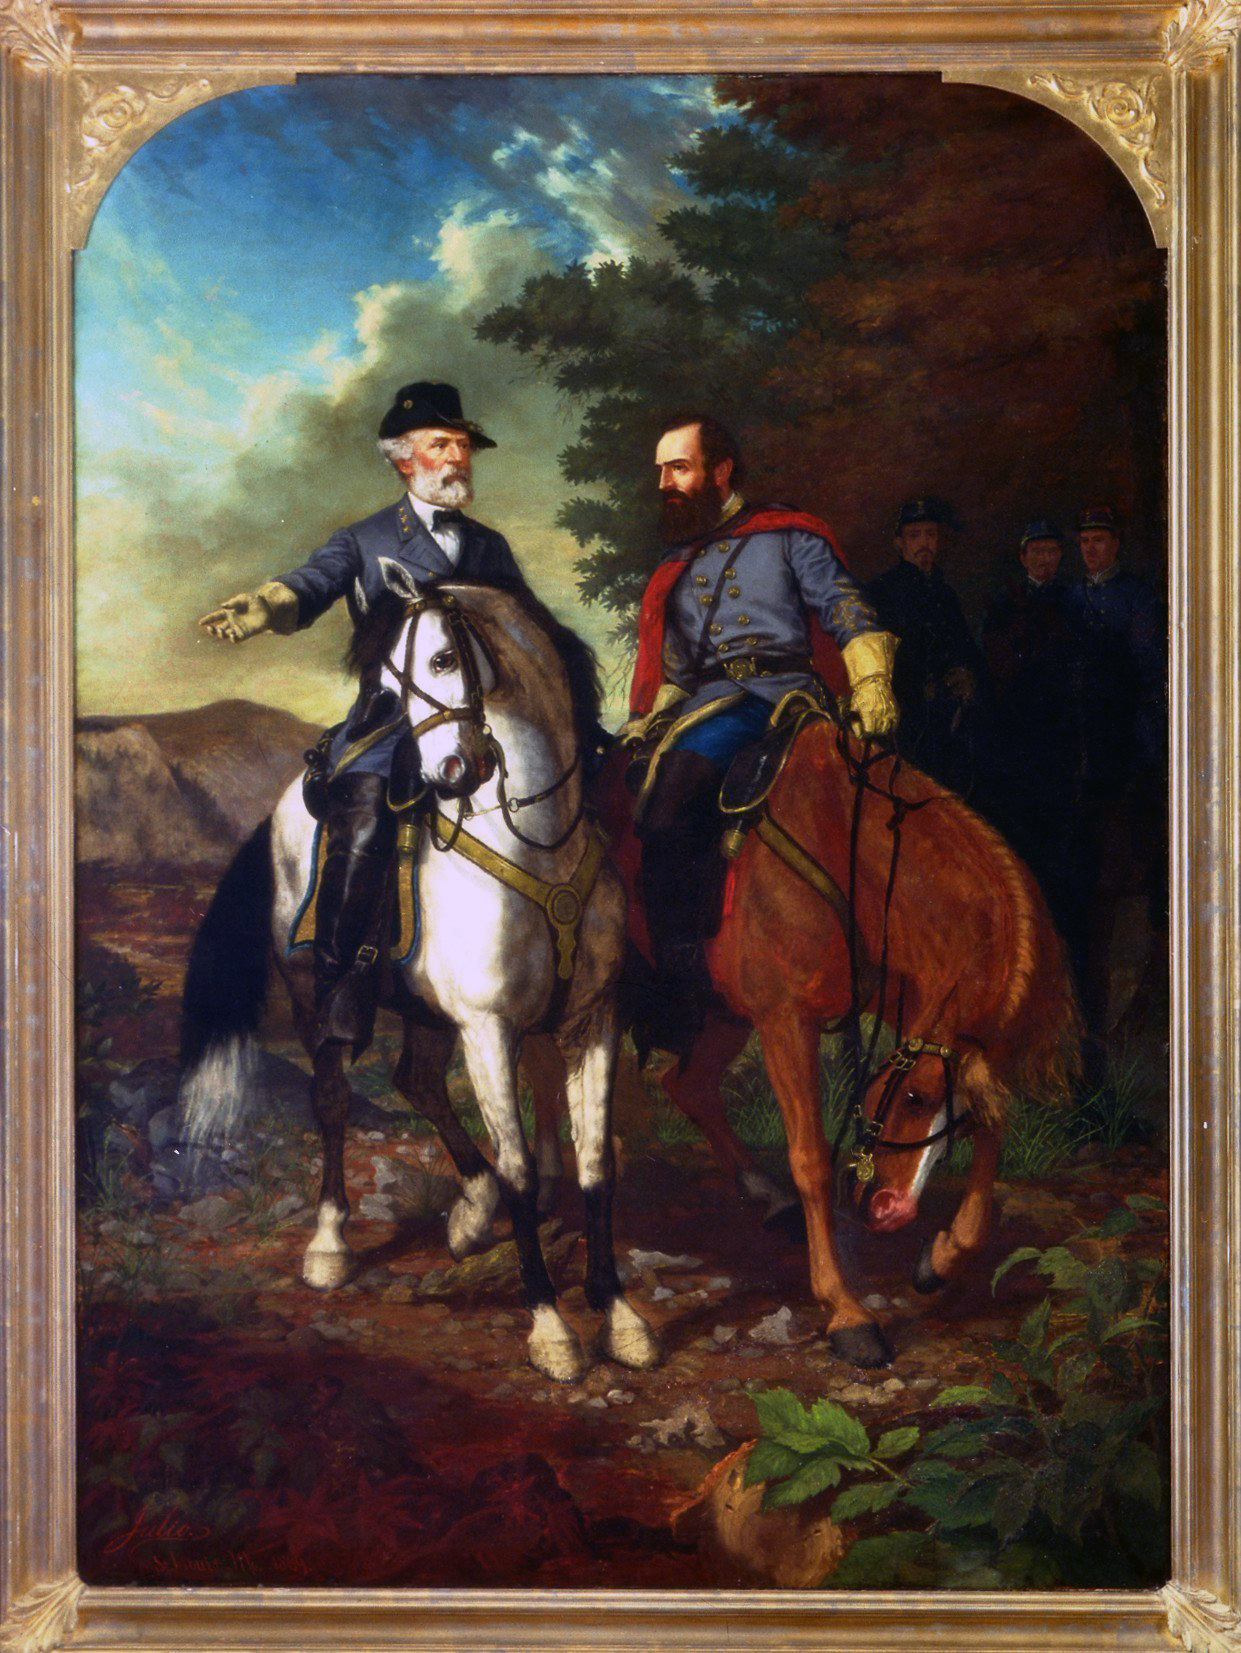 Everett B. D. Julio, <em>The Last Meeting of Lee and Jackson</em>, oil on canvas, 102 x 74 inches, 1869 (American Civil War Museum)